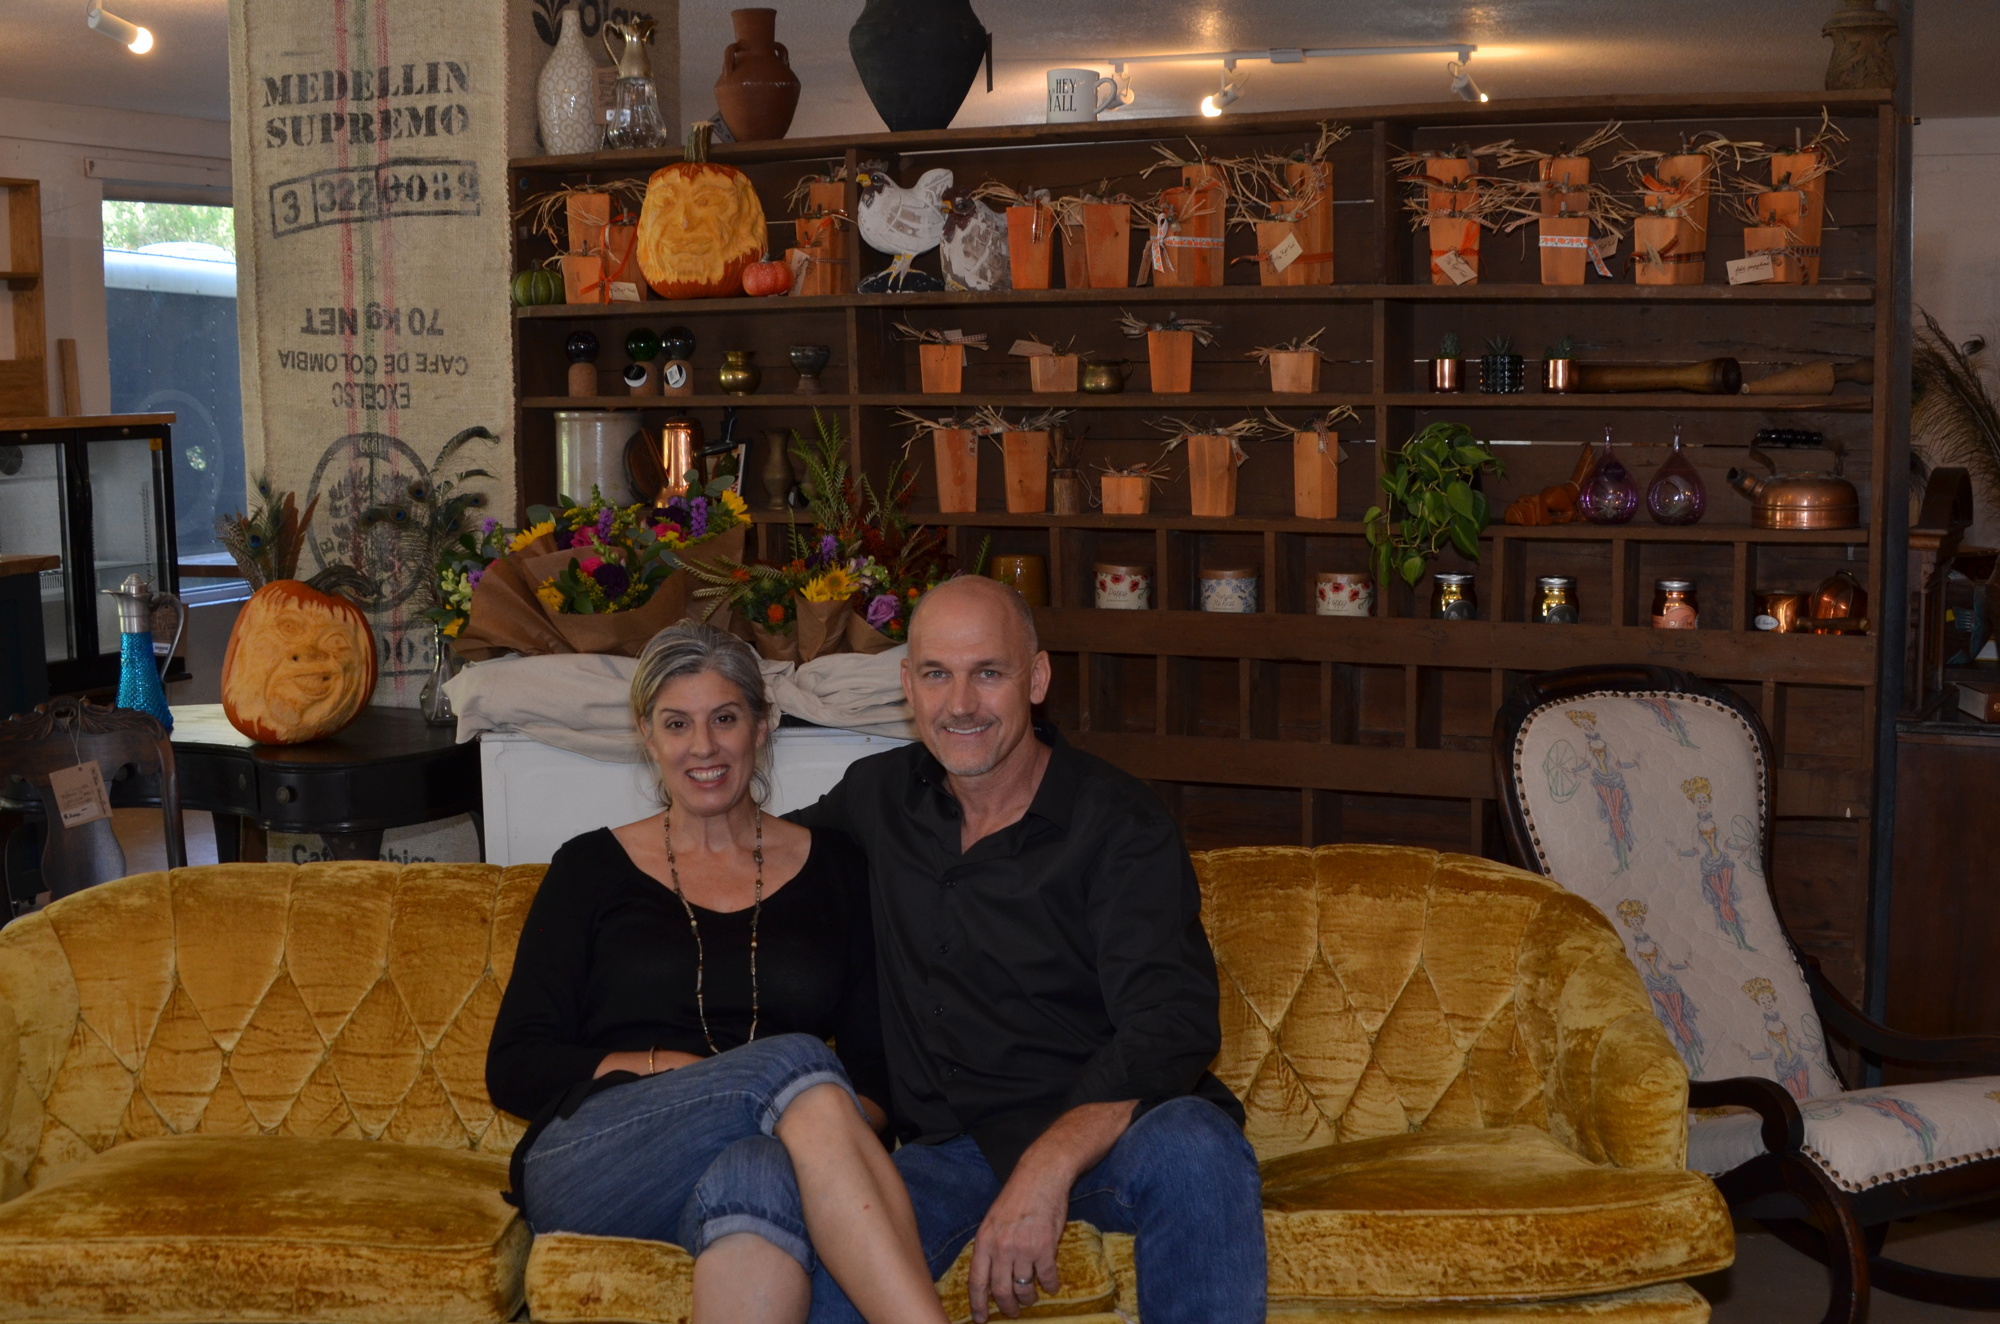 Tina LaVallee and Chris de Felice are the founders of Tildenville Marketplace, located in the old Page’s Pastiques building at Plant Street and Tildenville School Road.